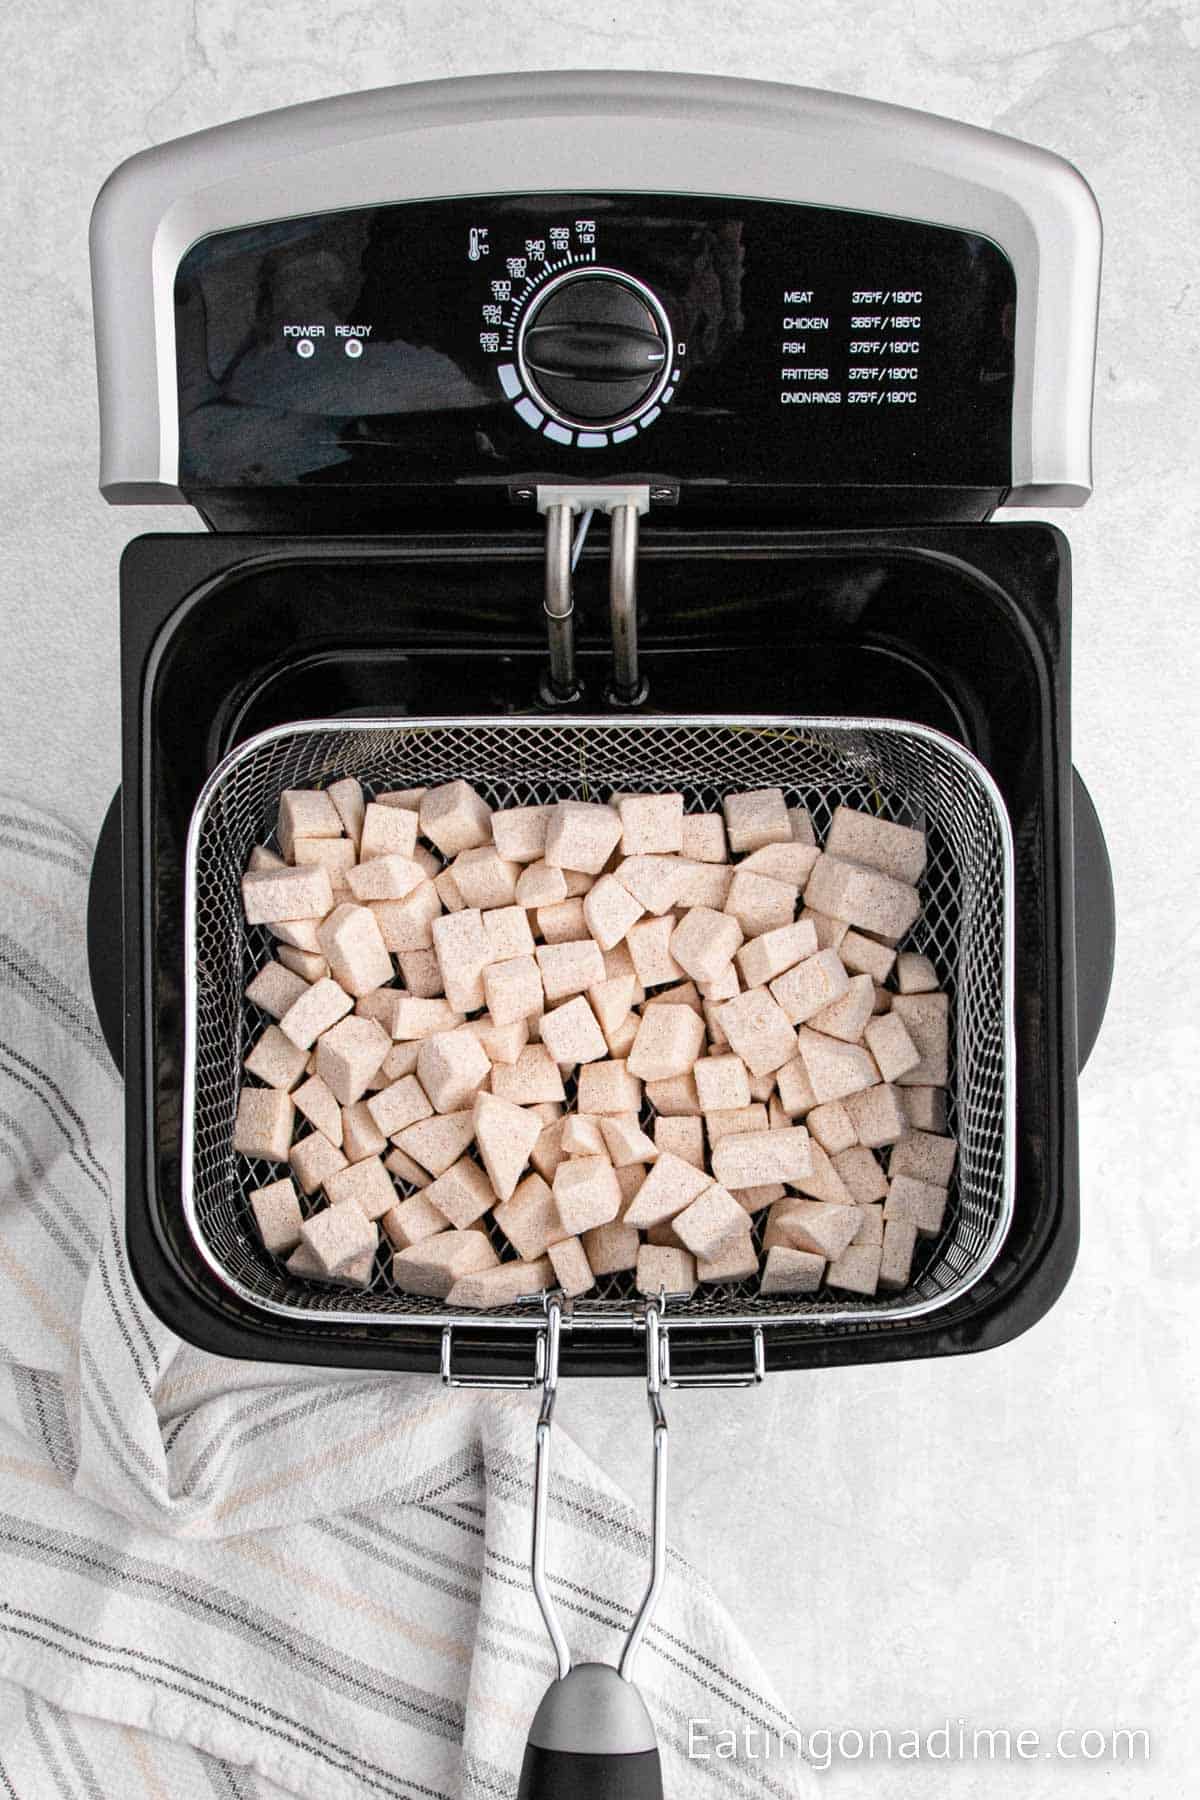 Placing the prepared diced potatoes in a fryer basket